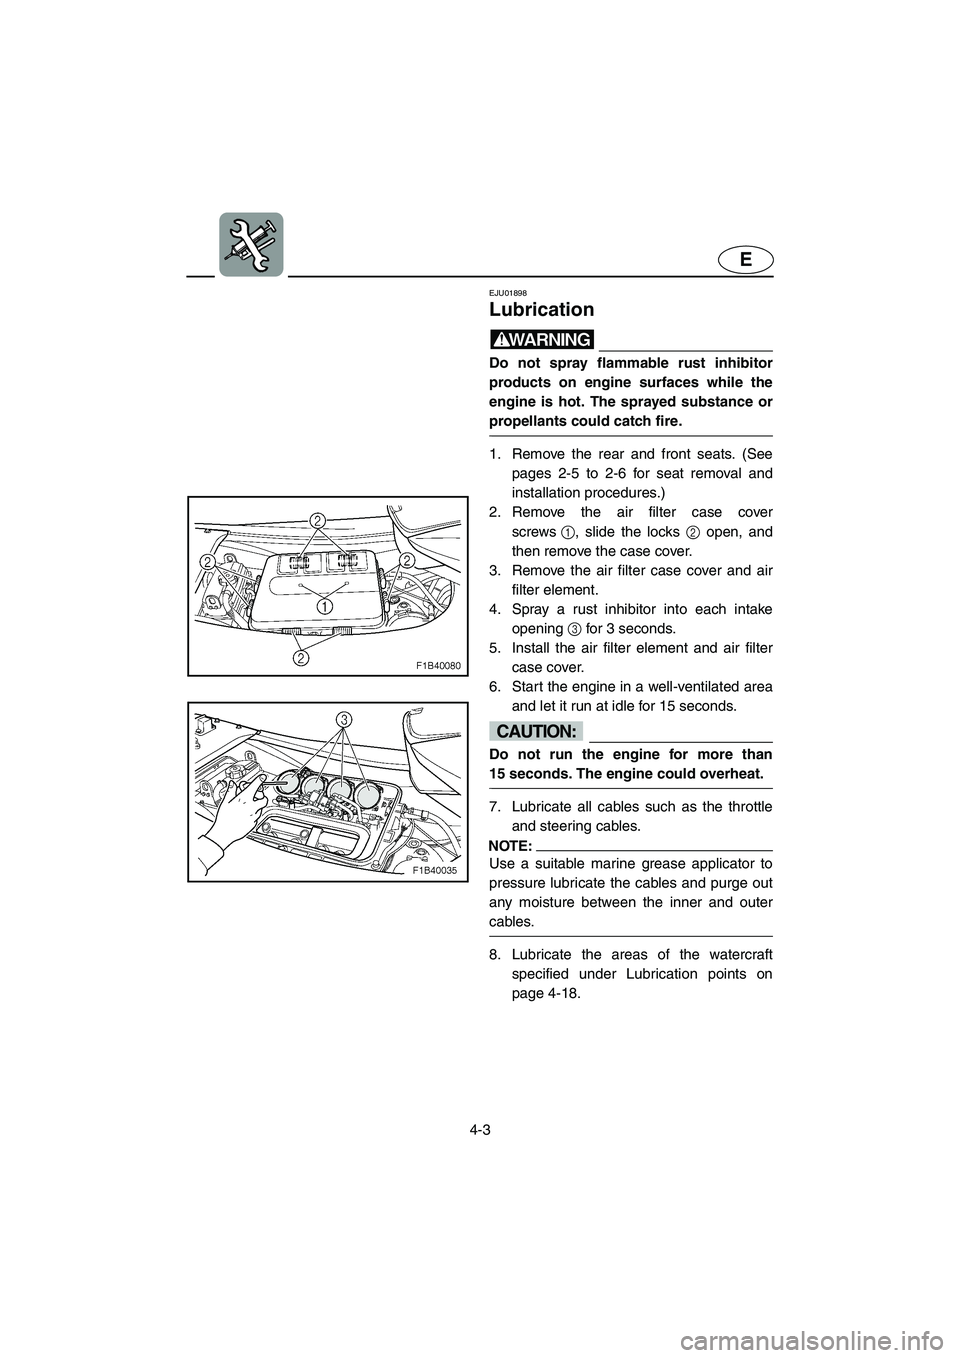 YAMAHA FX 2003  Owners Manual 4-3
E
EJU01898
Lubrication 
WARNING@ Do not spray flammable rust inhibitor
products on engine surfaces while the
engine is hot. The sprayed substance or
propellants could catch fire. 
@ 
1. Remove the